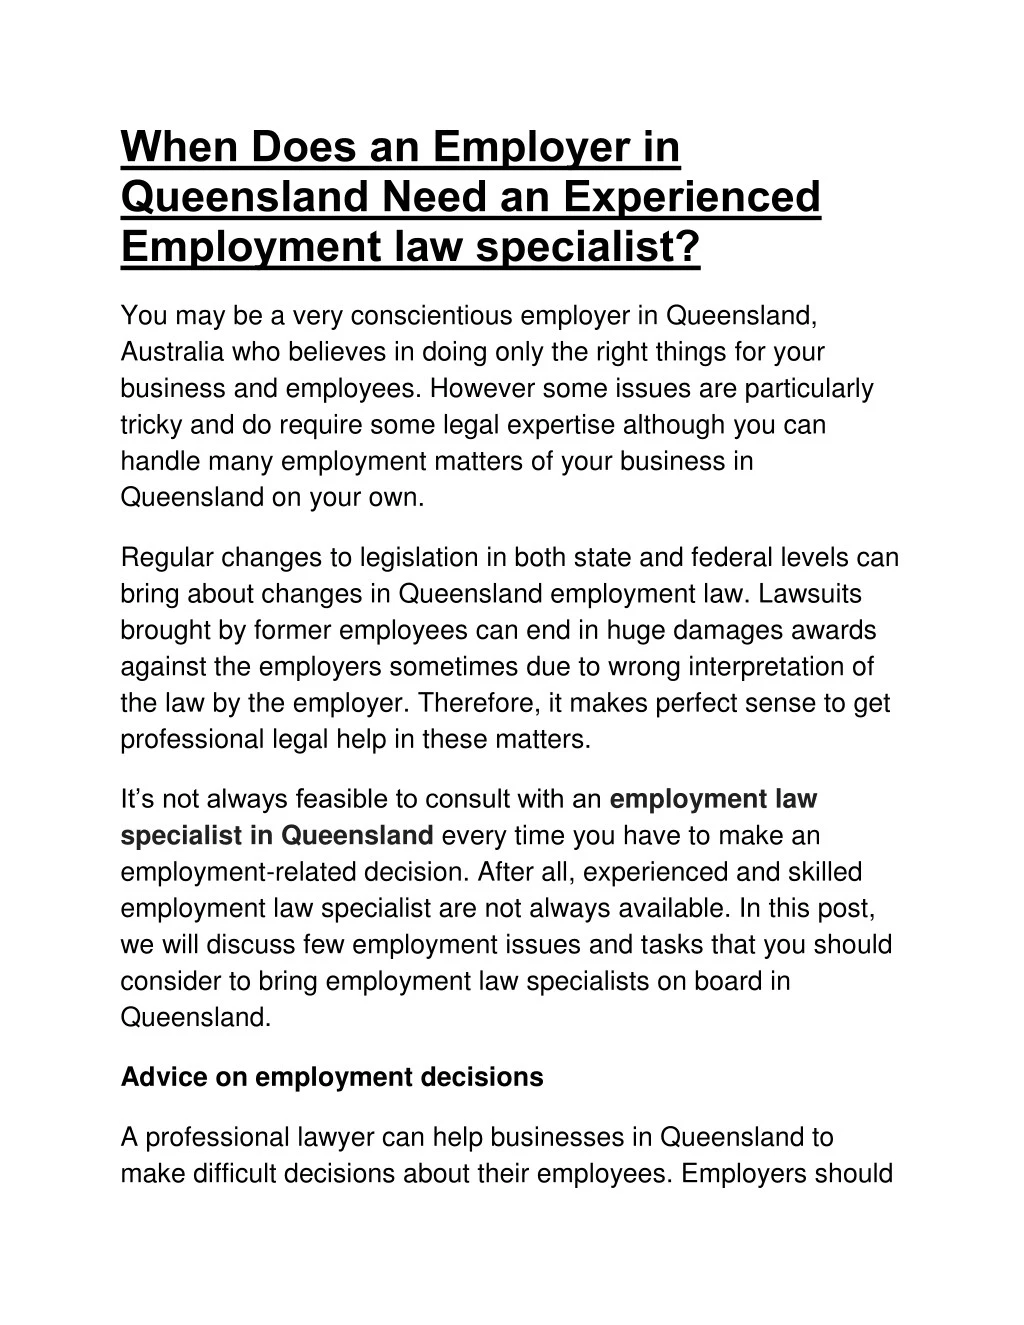 when does an employer in queensland need